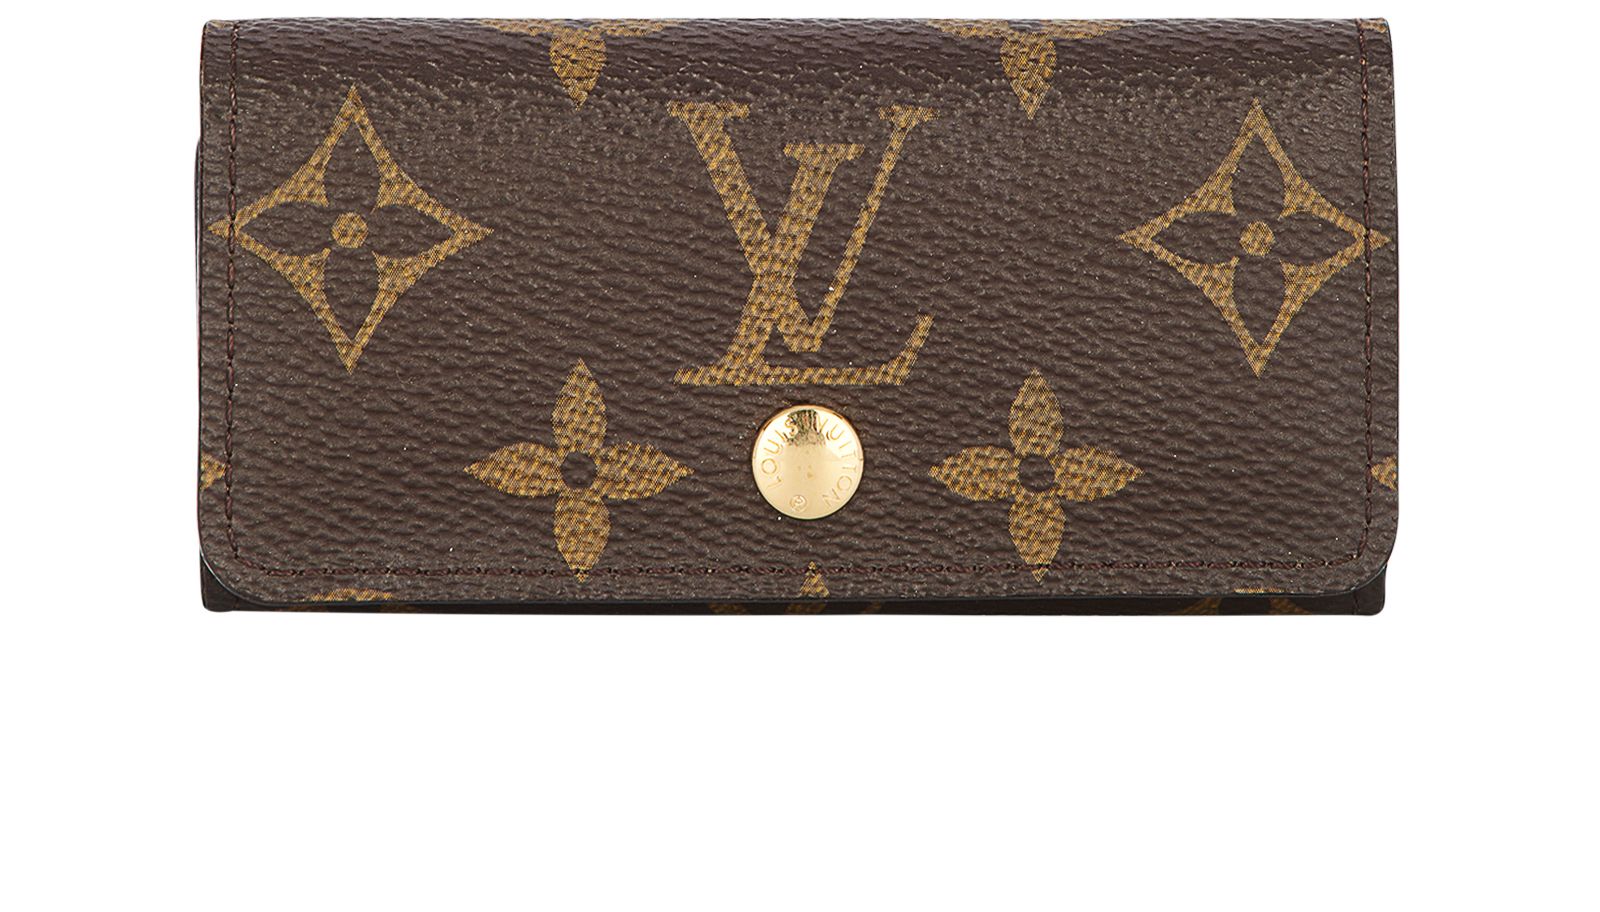 Louis Vuitton Credit Card And Key Holder